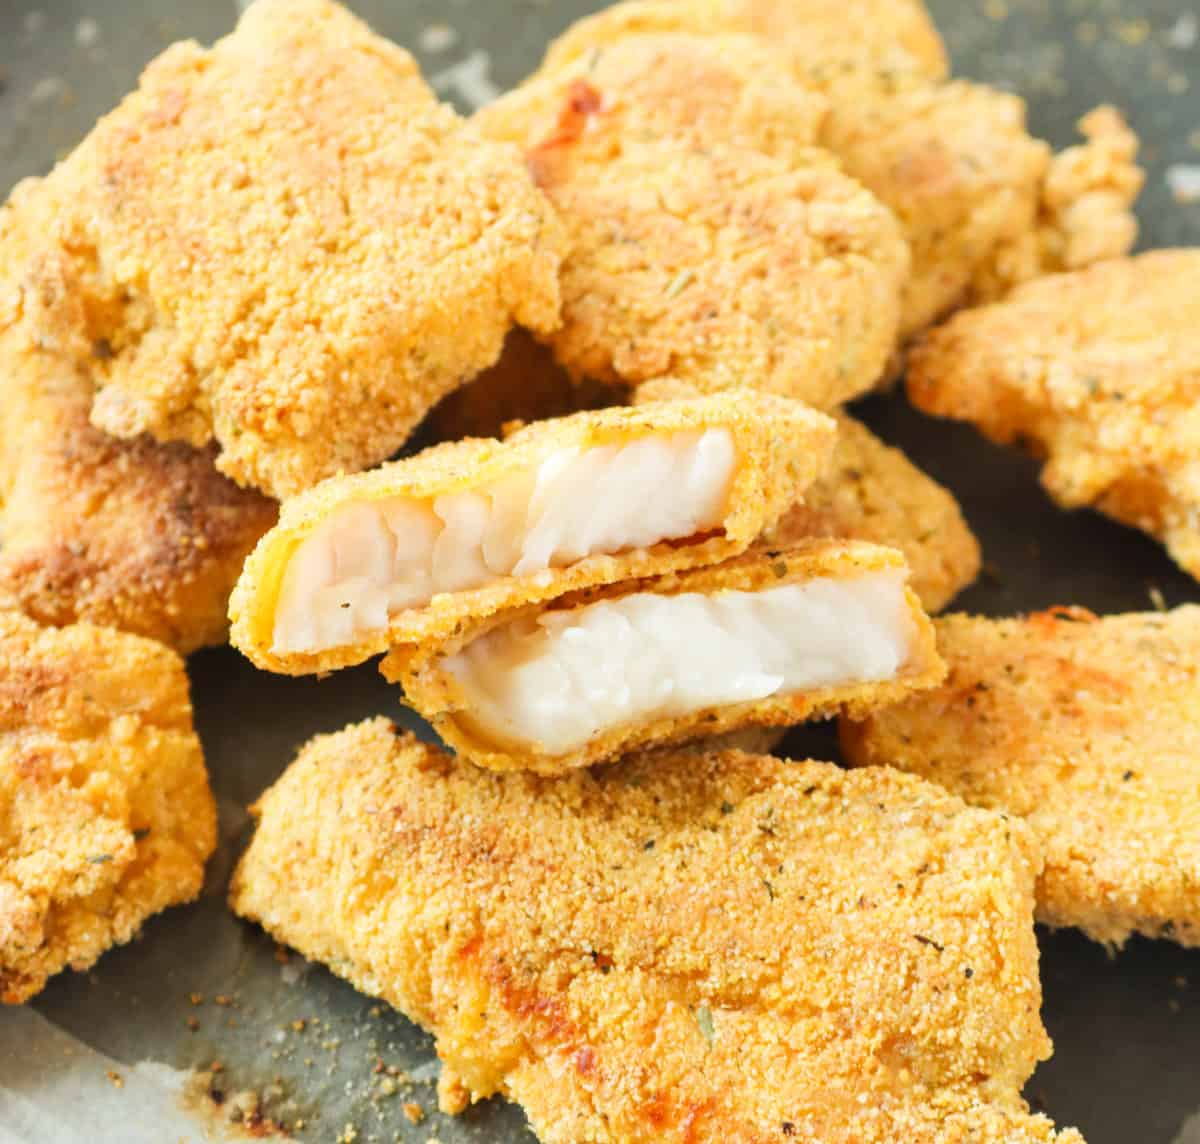 Showing off the tender, flaky insider shot of delicious fried catfish nuggets